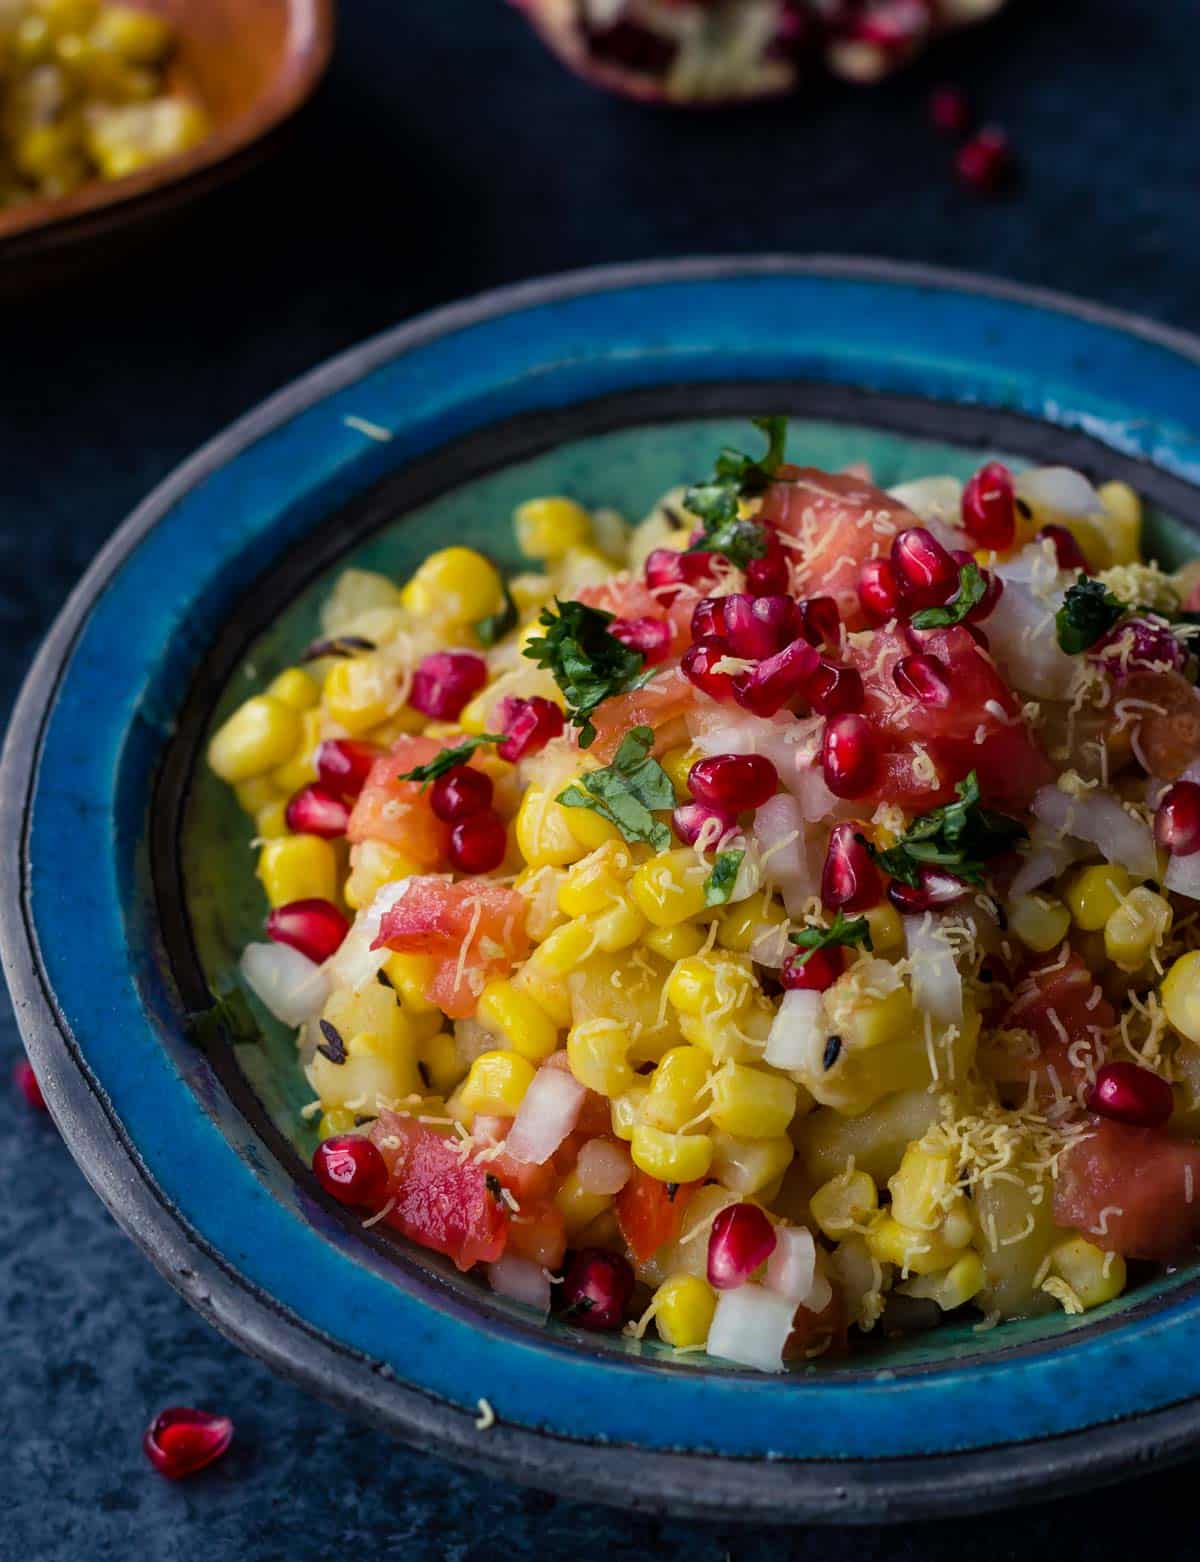 Try this non-traditional way of making corn bhel or corn chaat* and you'll be hooked. While most Indian street food demands a mandatory drizzling of tamarind chutney and green chutney, this no-fuss corn bhel recipe doesn't require either. Since corn bhel is best served at room temperature, it is perfect for not just as snacks but for school lunches too!